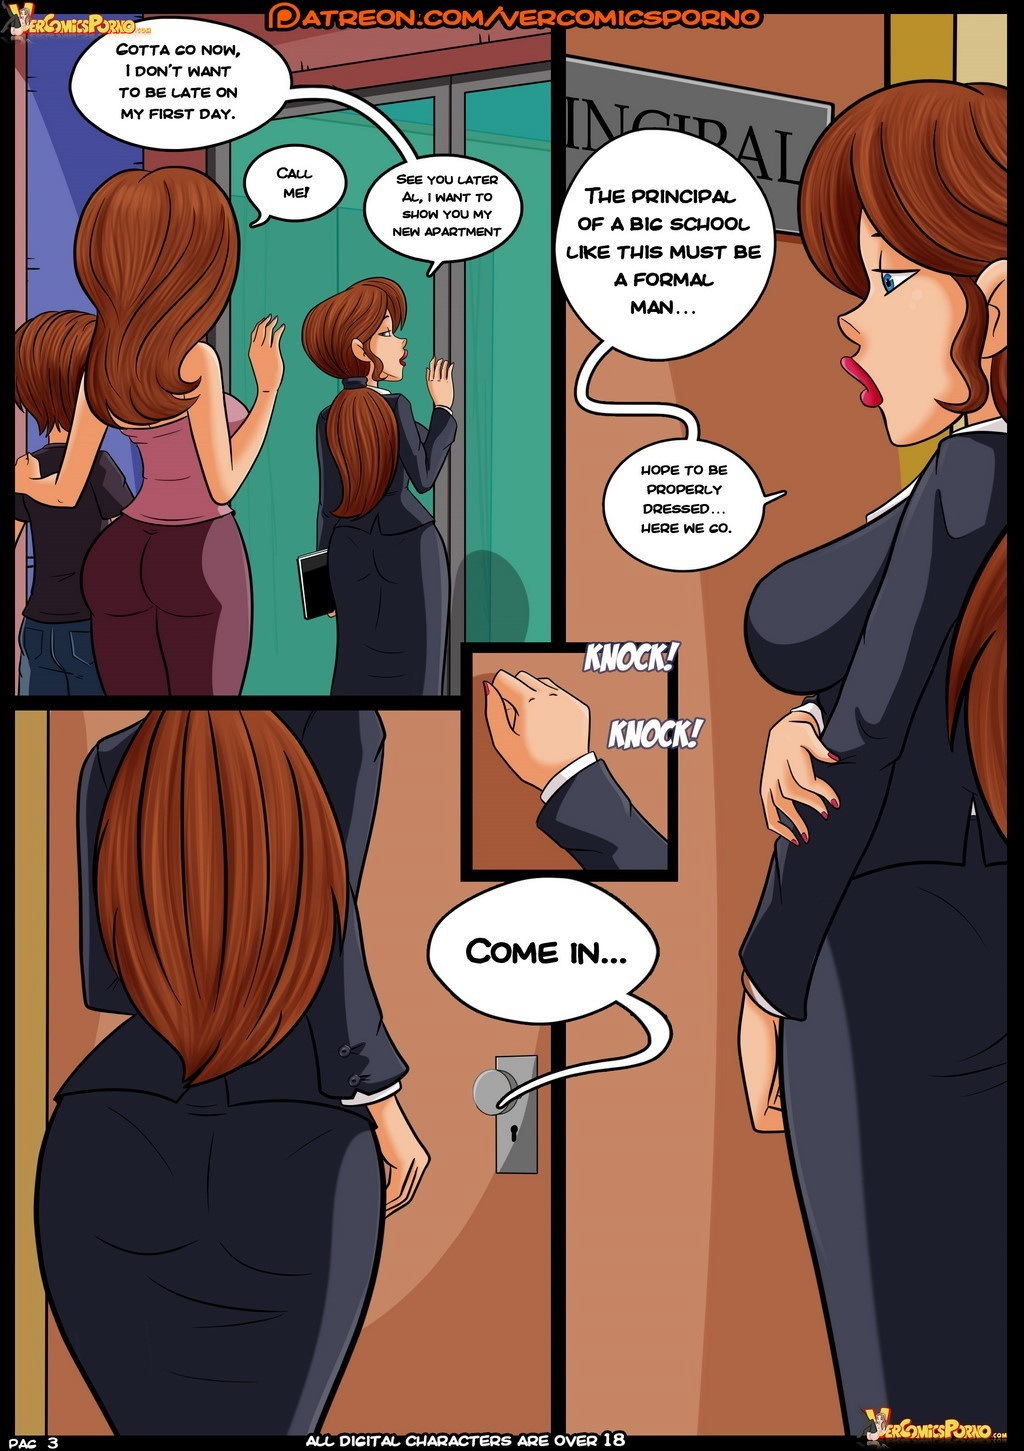 Valery Chronicles - Page 4